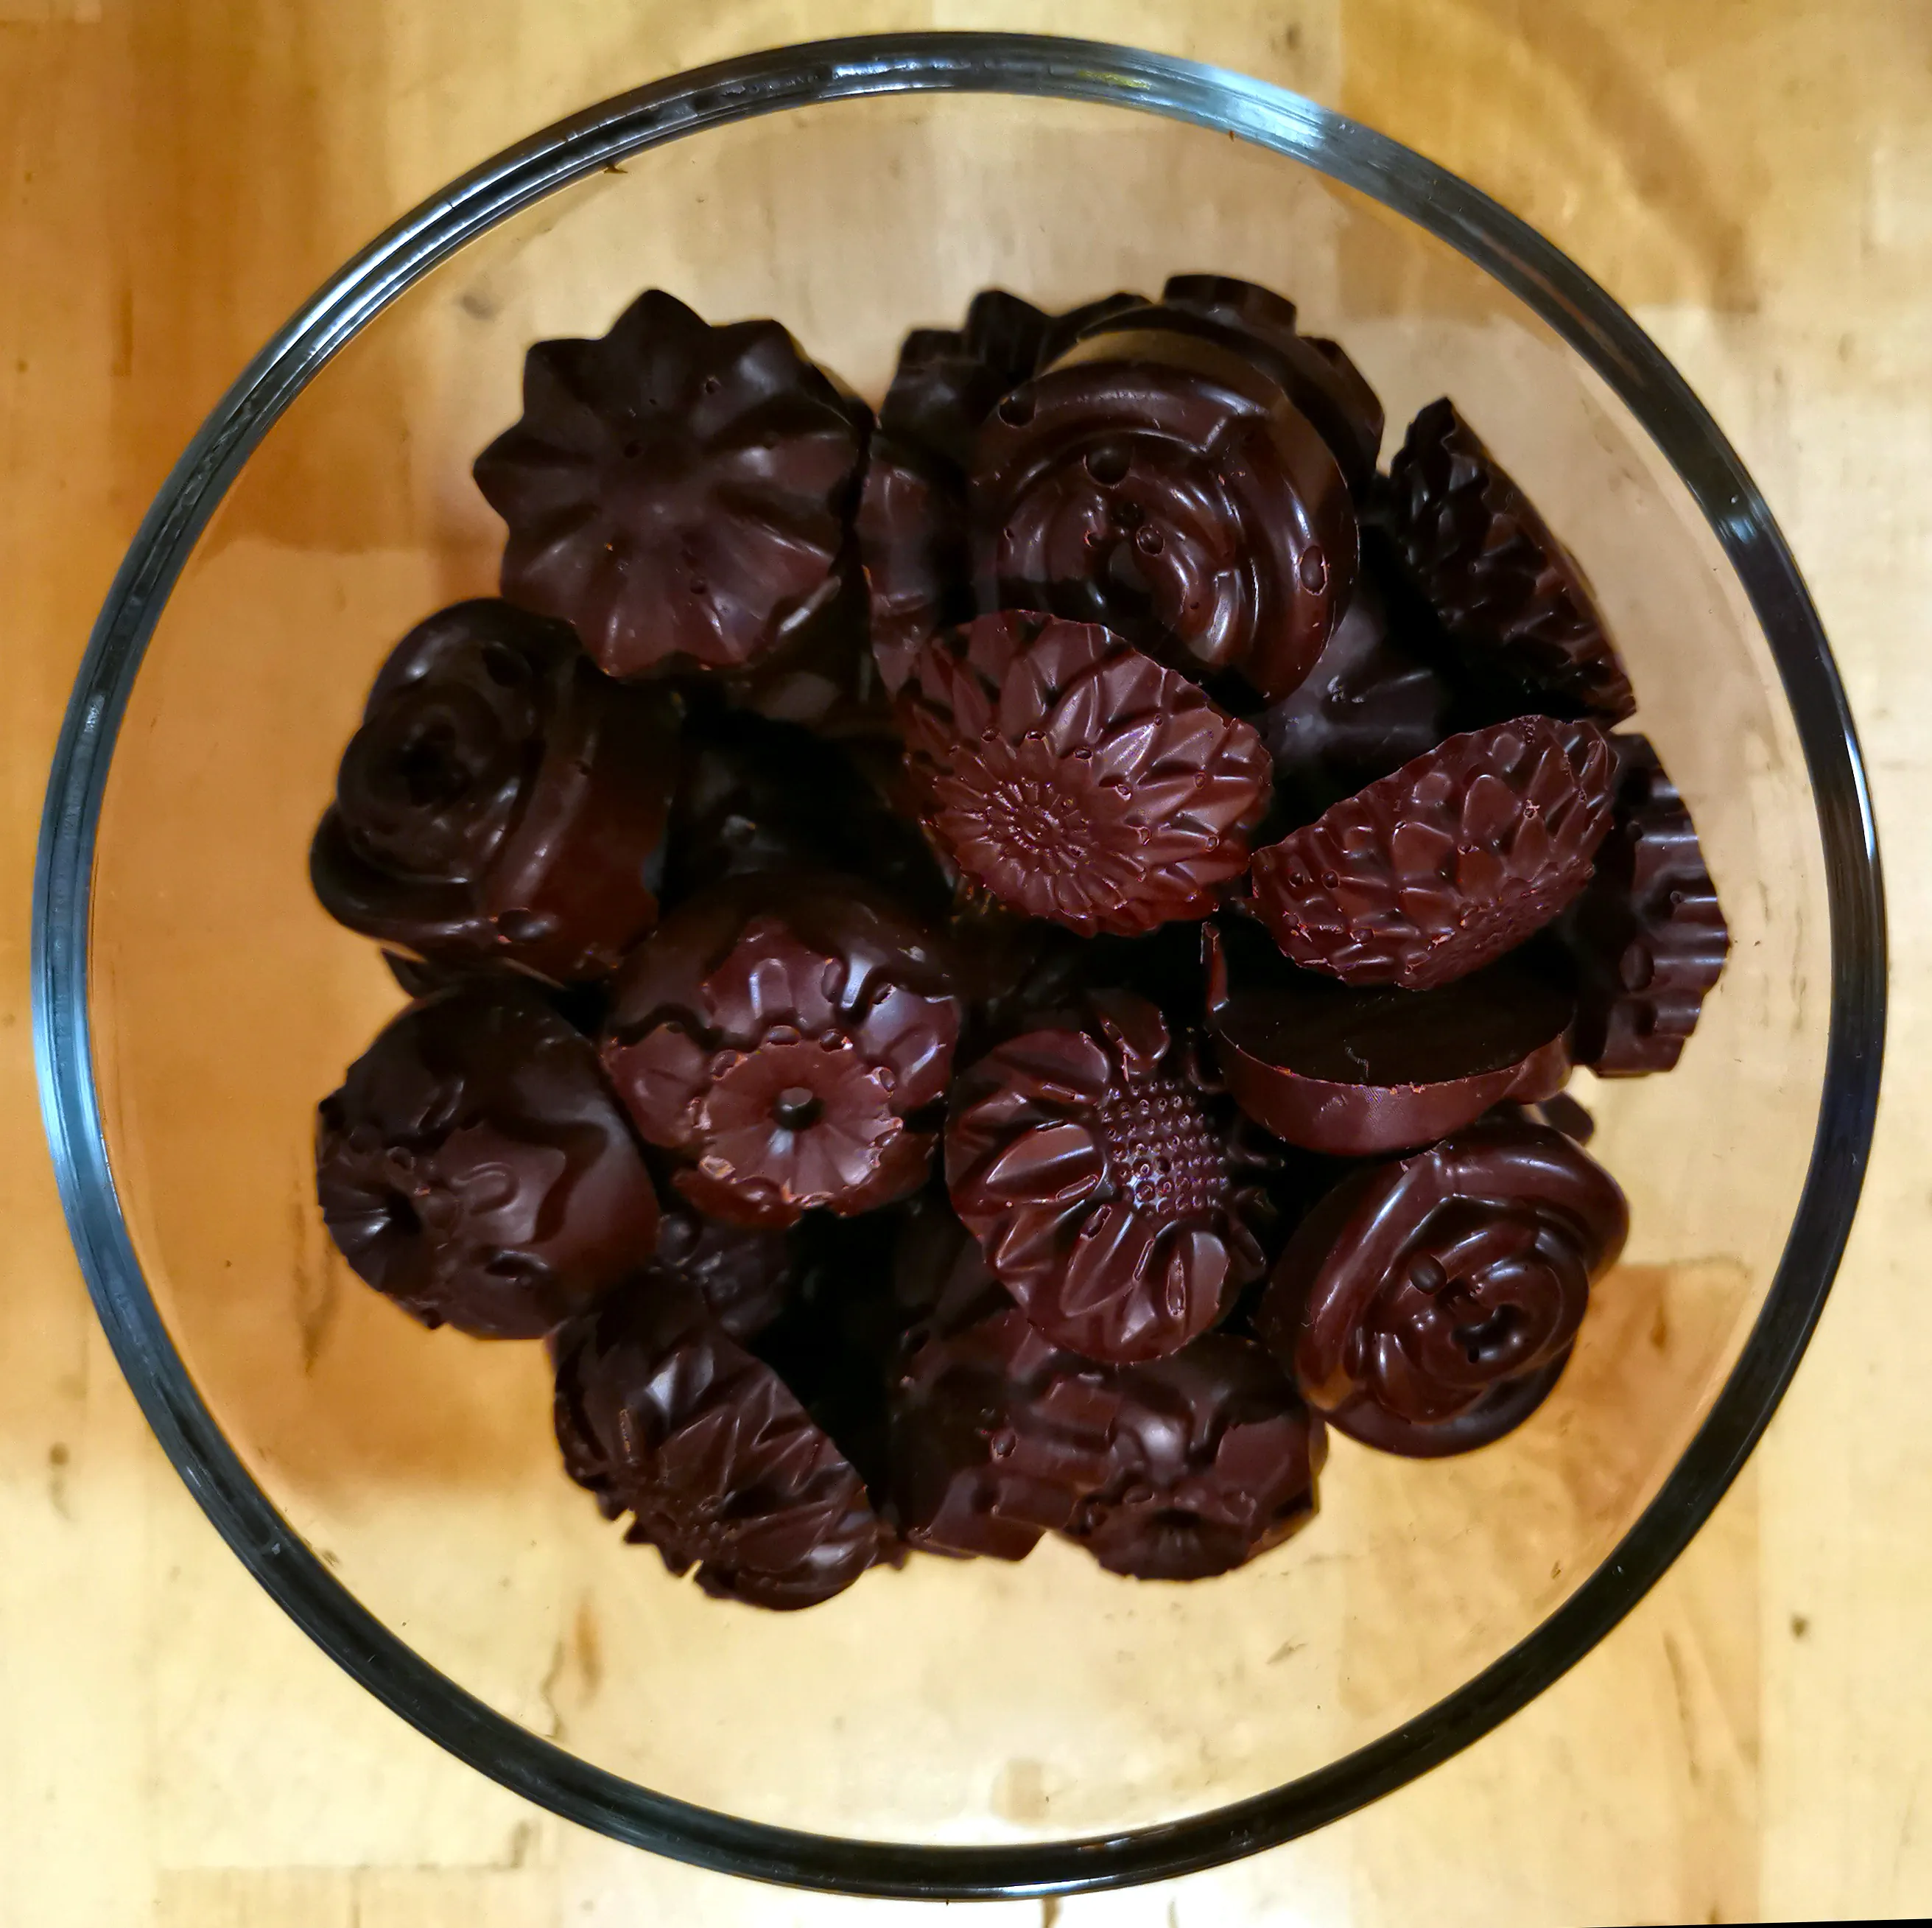 Cacao candies in a clear glass bowl